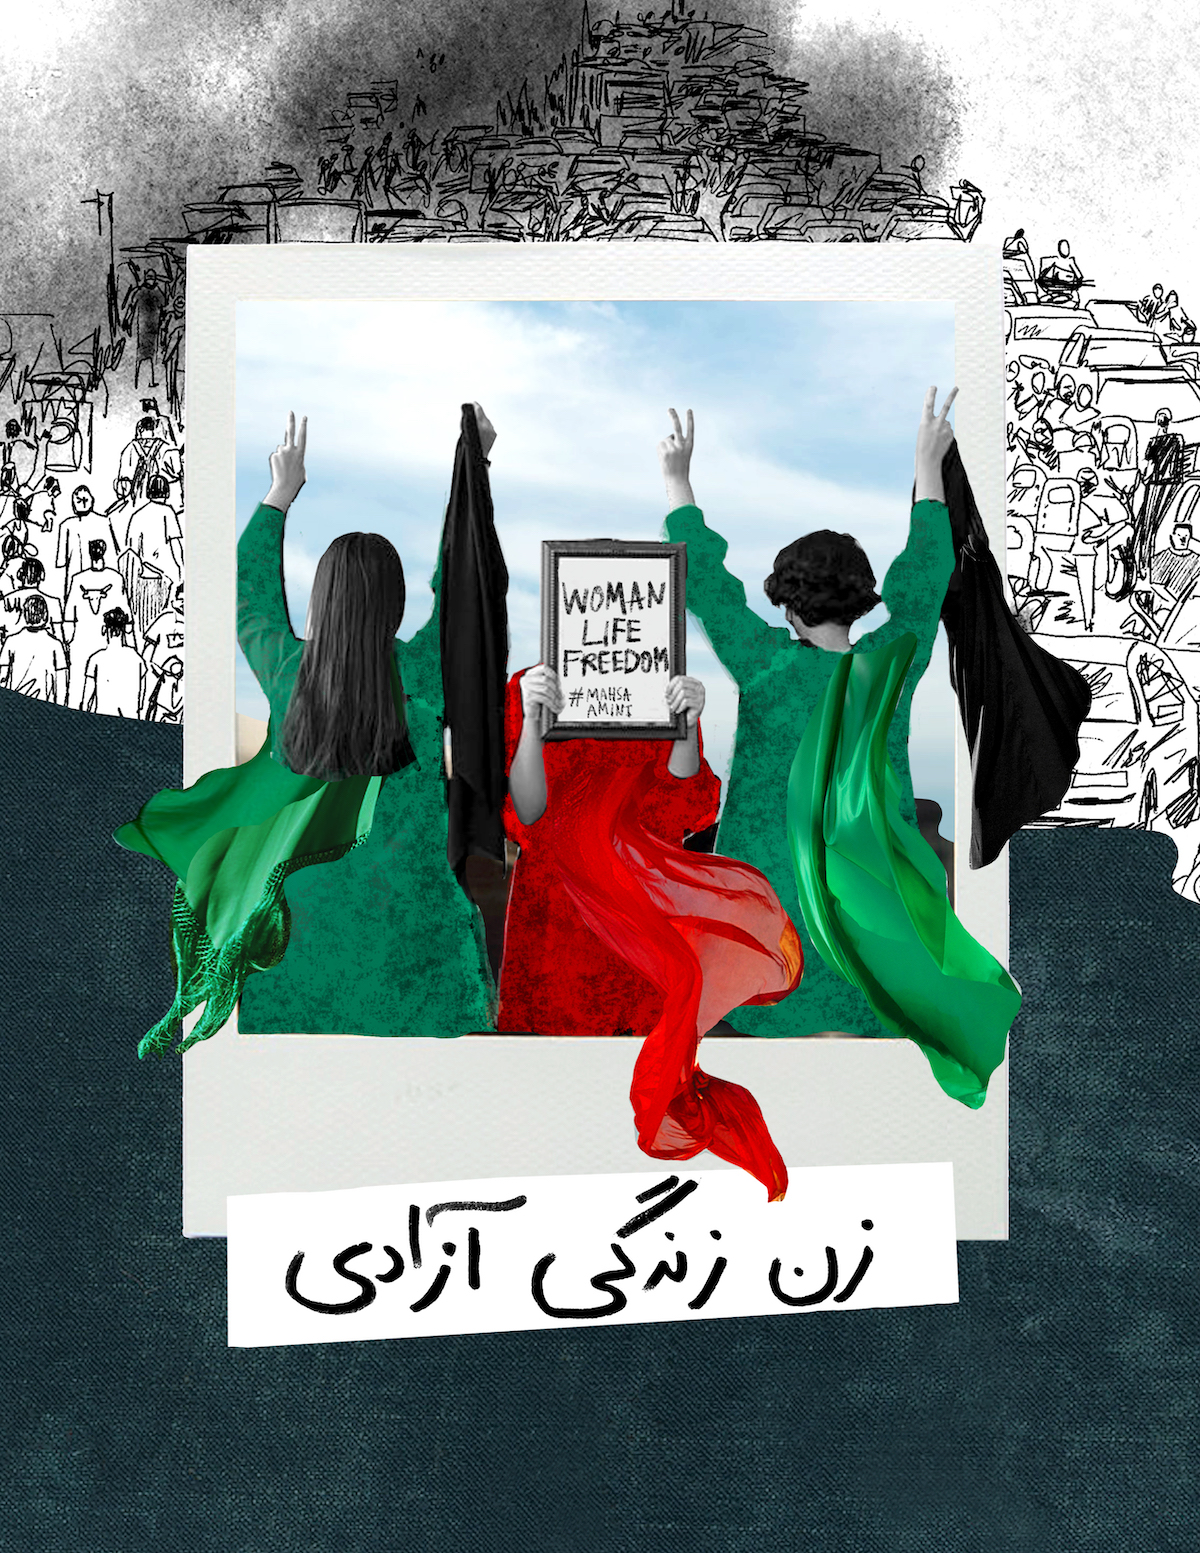 YEOJA Magazine | Open Letter about the feminist Uprising in Iran